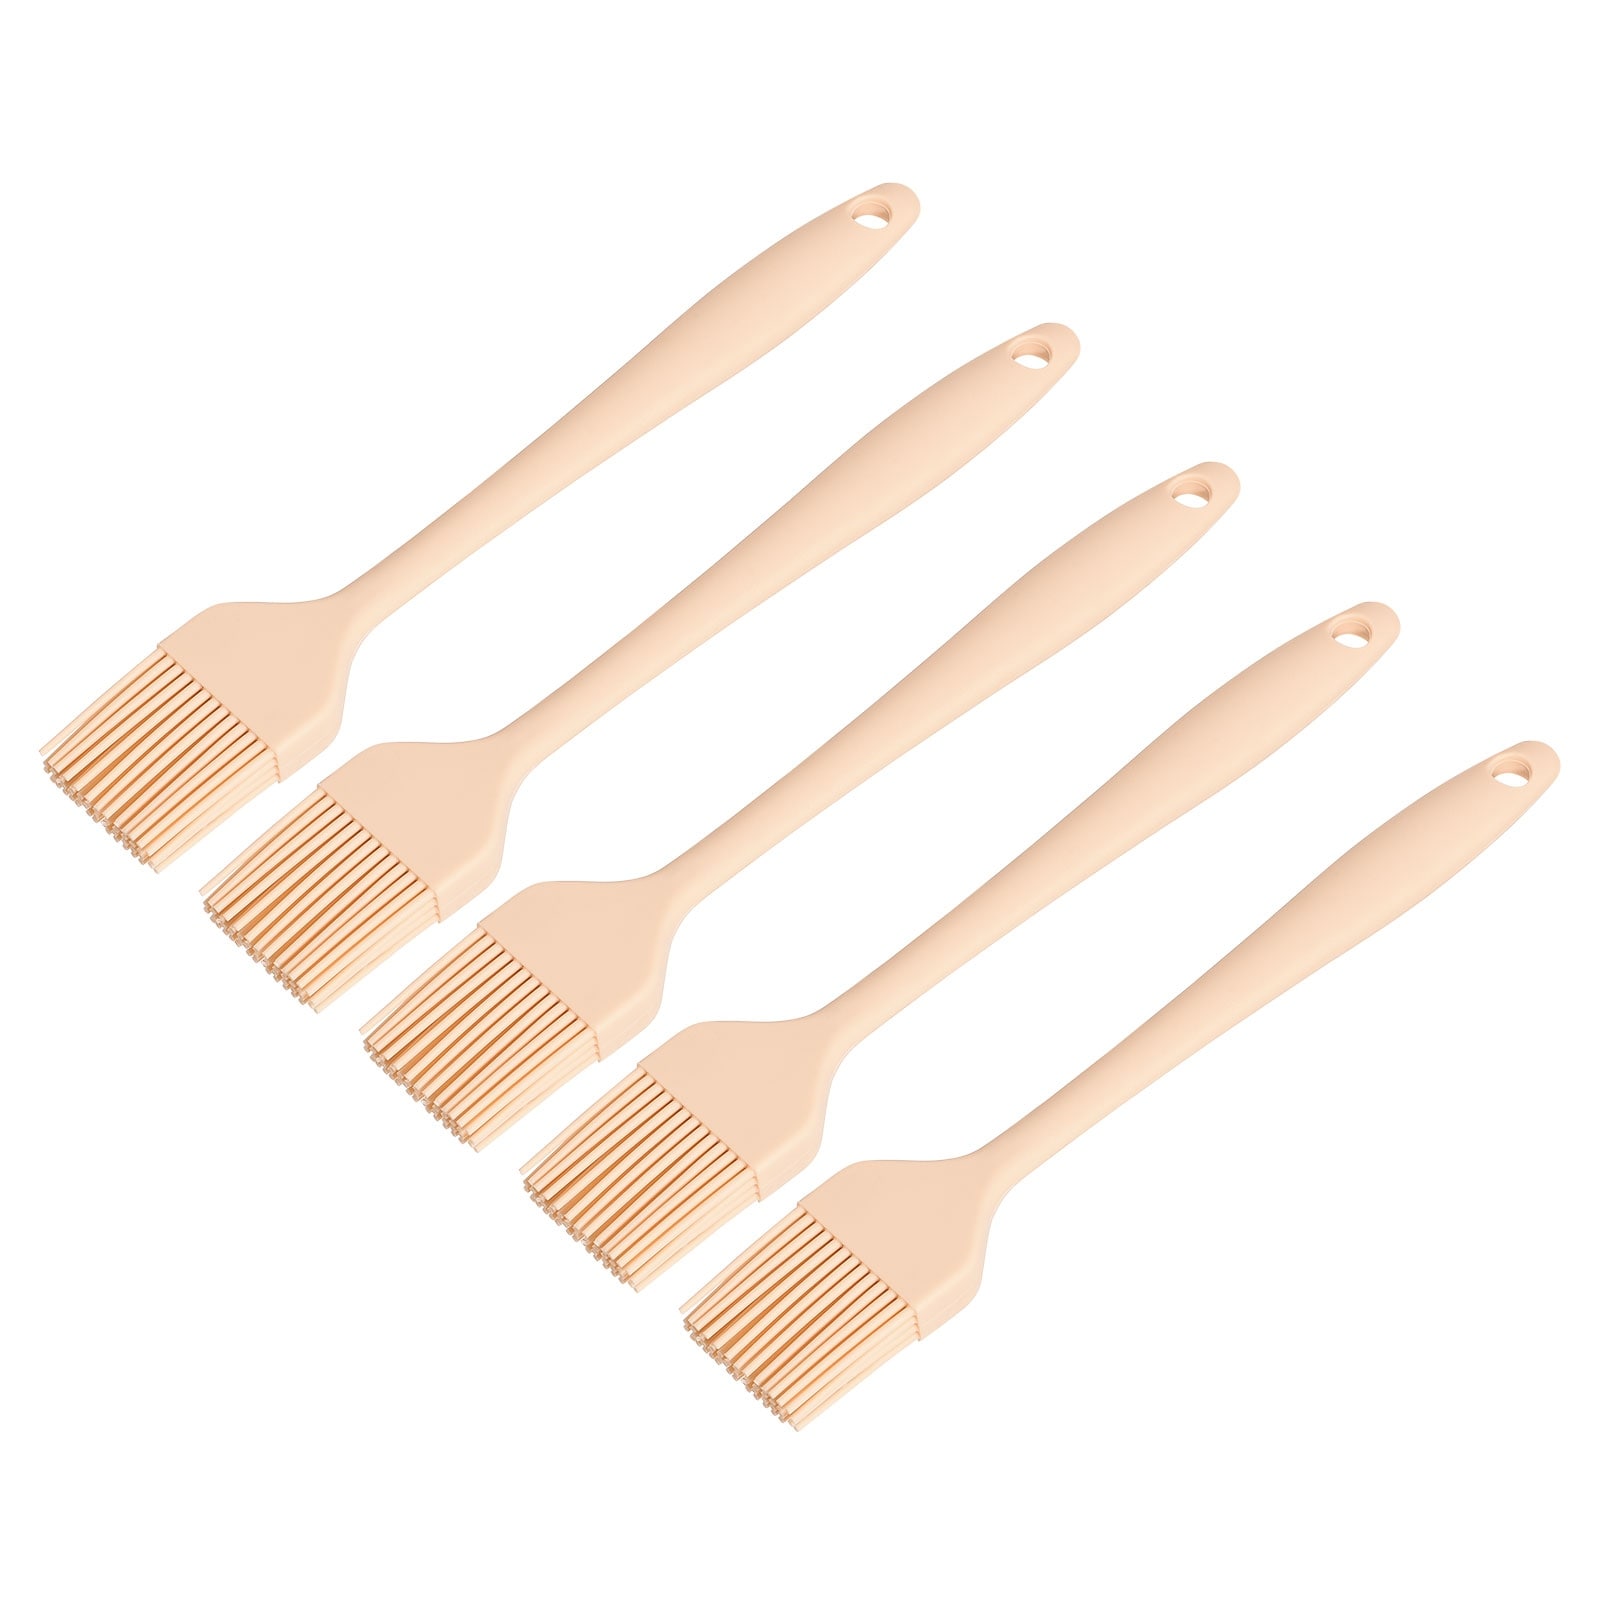 Oil and Butter Brush,Silicone Basting Brush with Wooden Hand,Pastry Brush  for Cooking Black